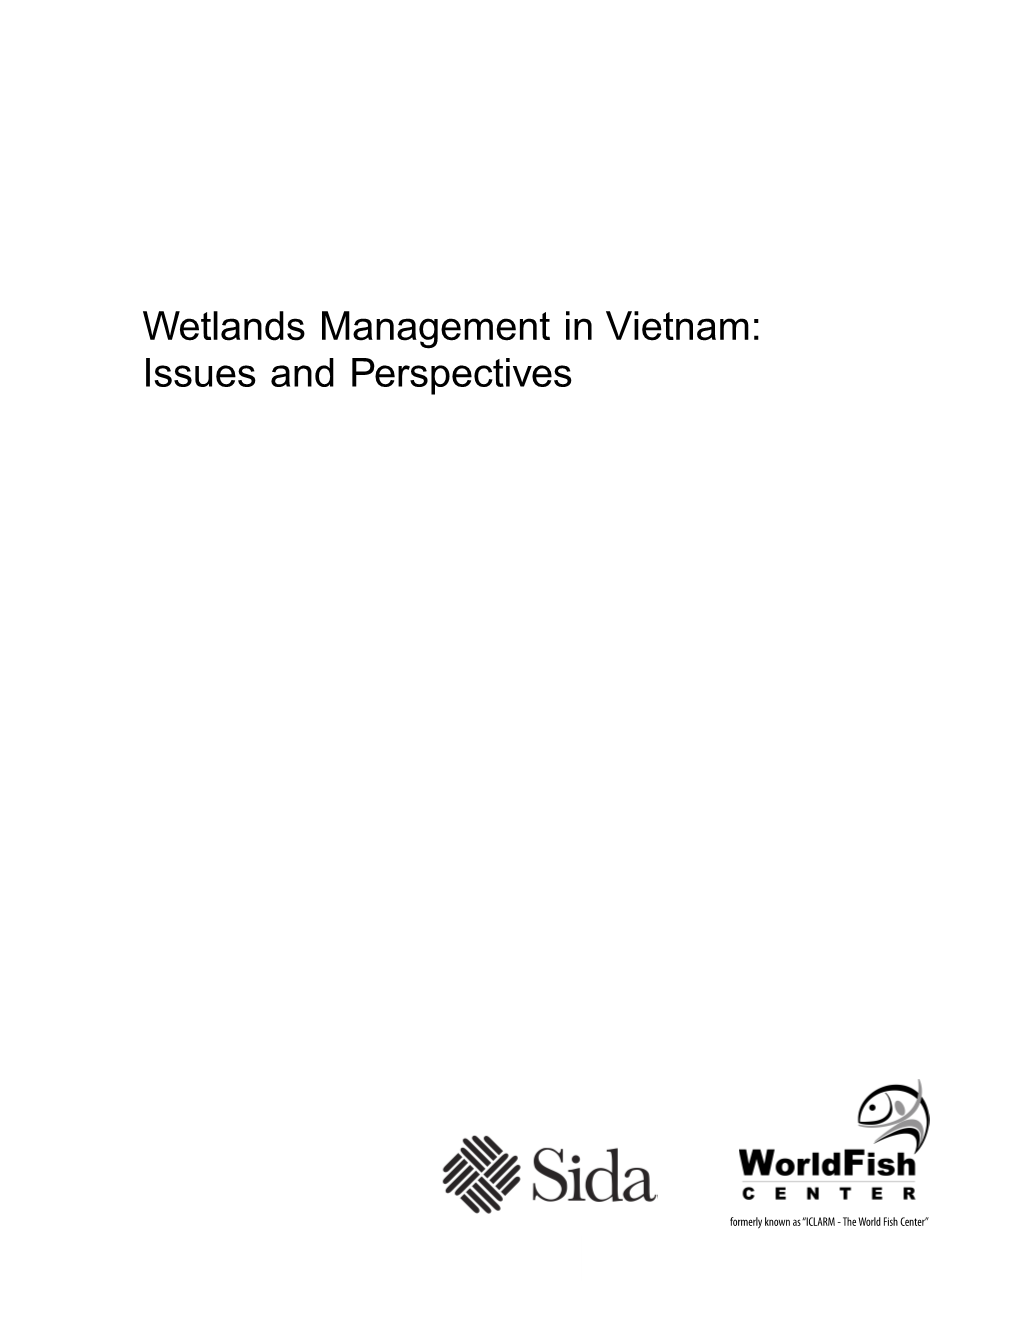 Wetlands Management in Vietnam: Issues and Perspectives